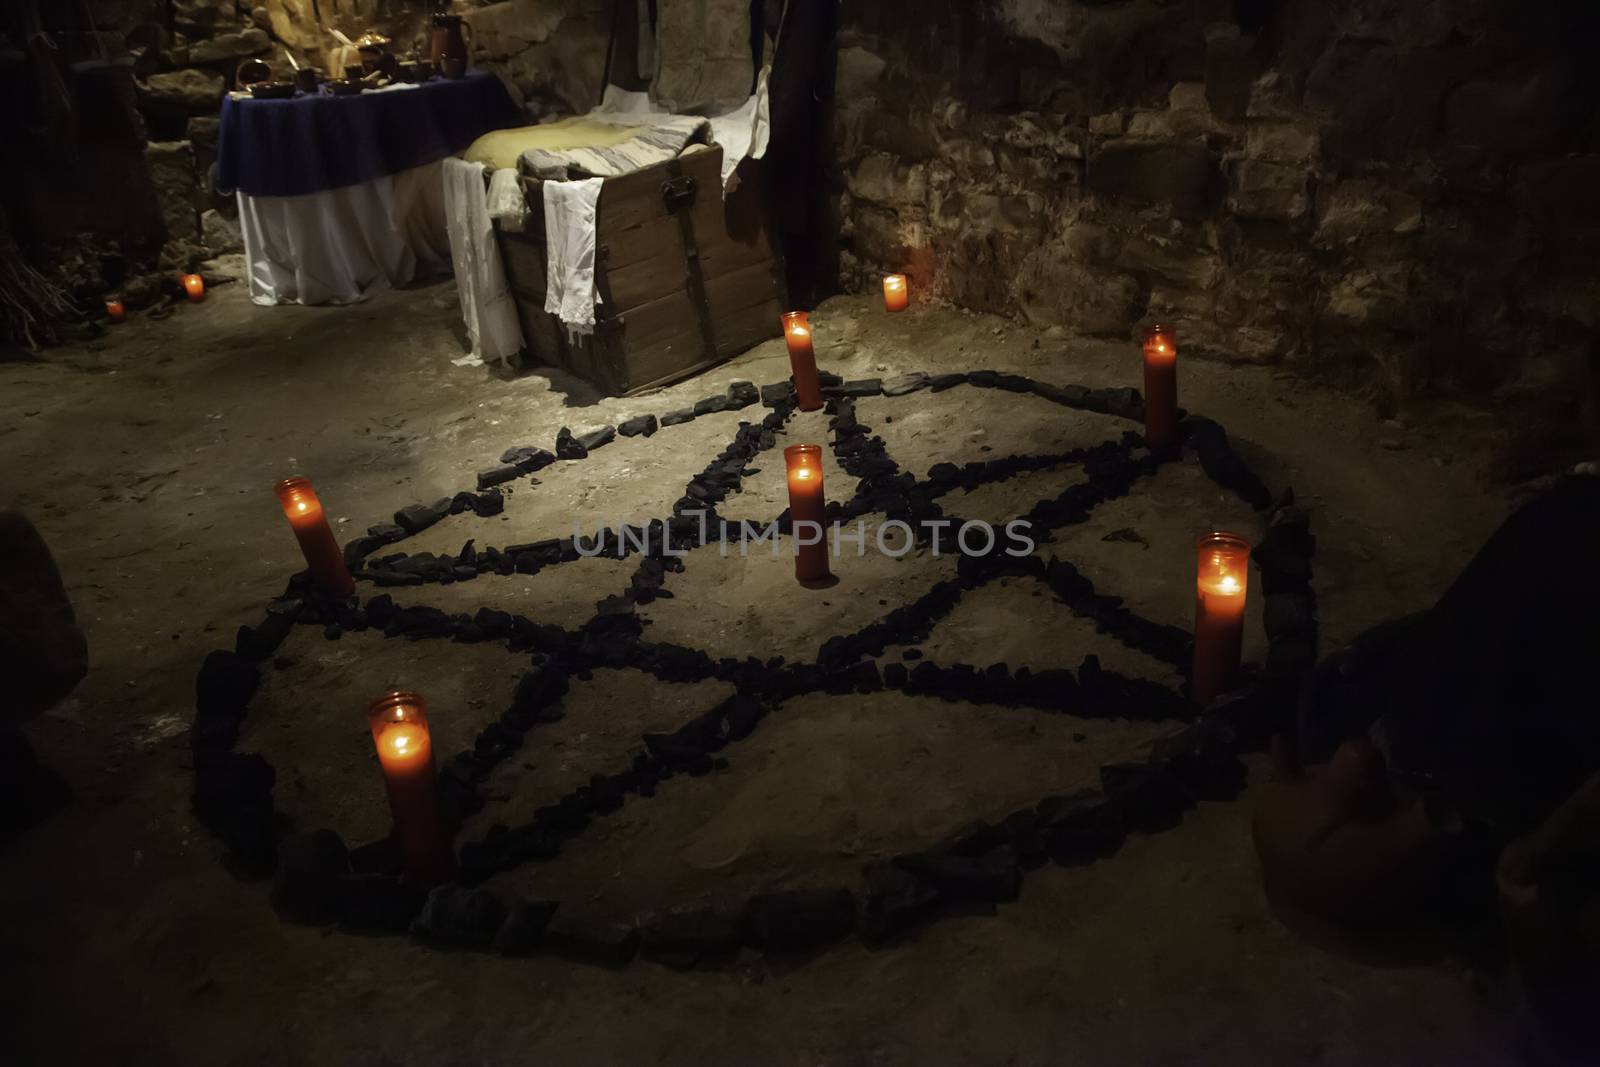 Satanic pentacle with lighted candles by esebene